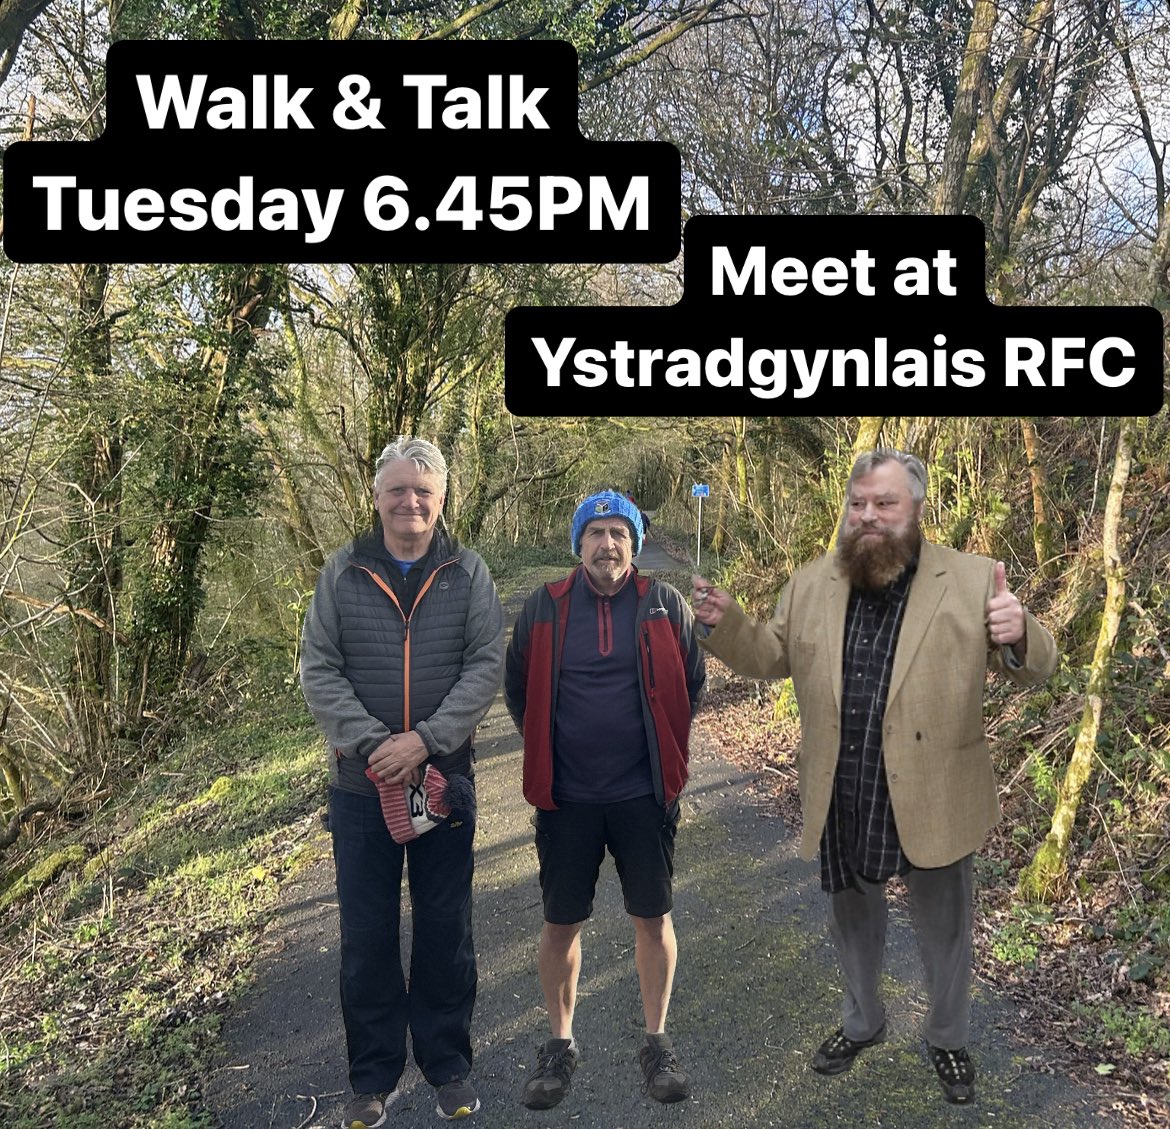 Tonight we meet to talk and walk around the area. You never know who you will meet and connect with. Walking is great for our physical and mental health, especially from middle age onwards. Meet tonight at Ystradgynlais Rugby Club 6.45pm ‘Gordon’s Alive’